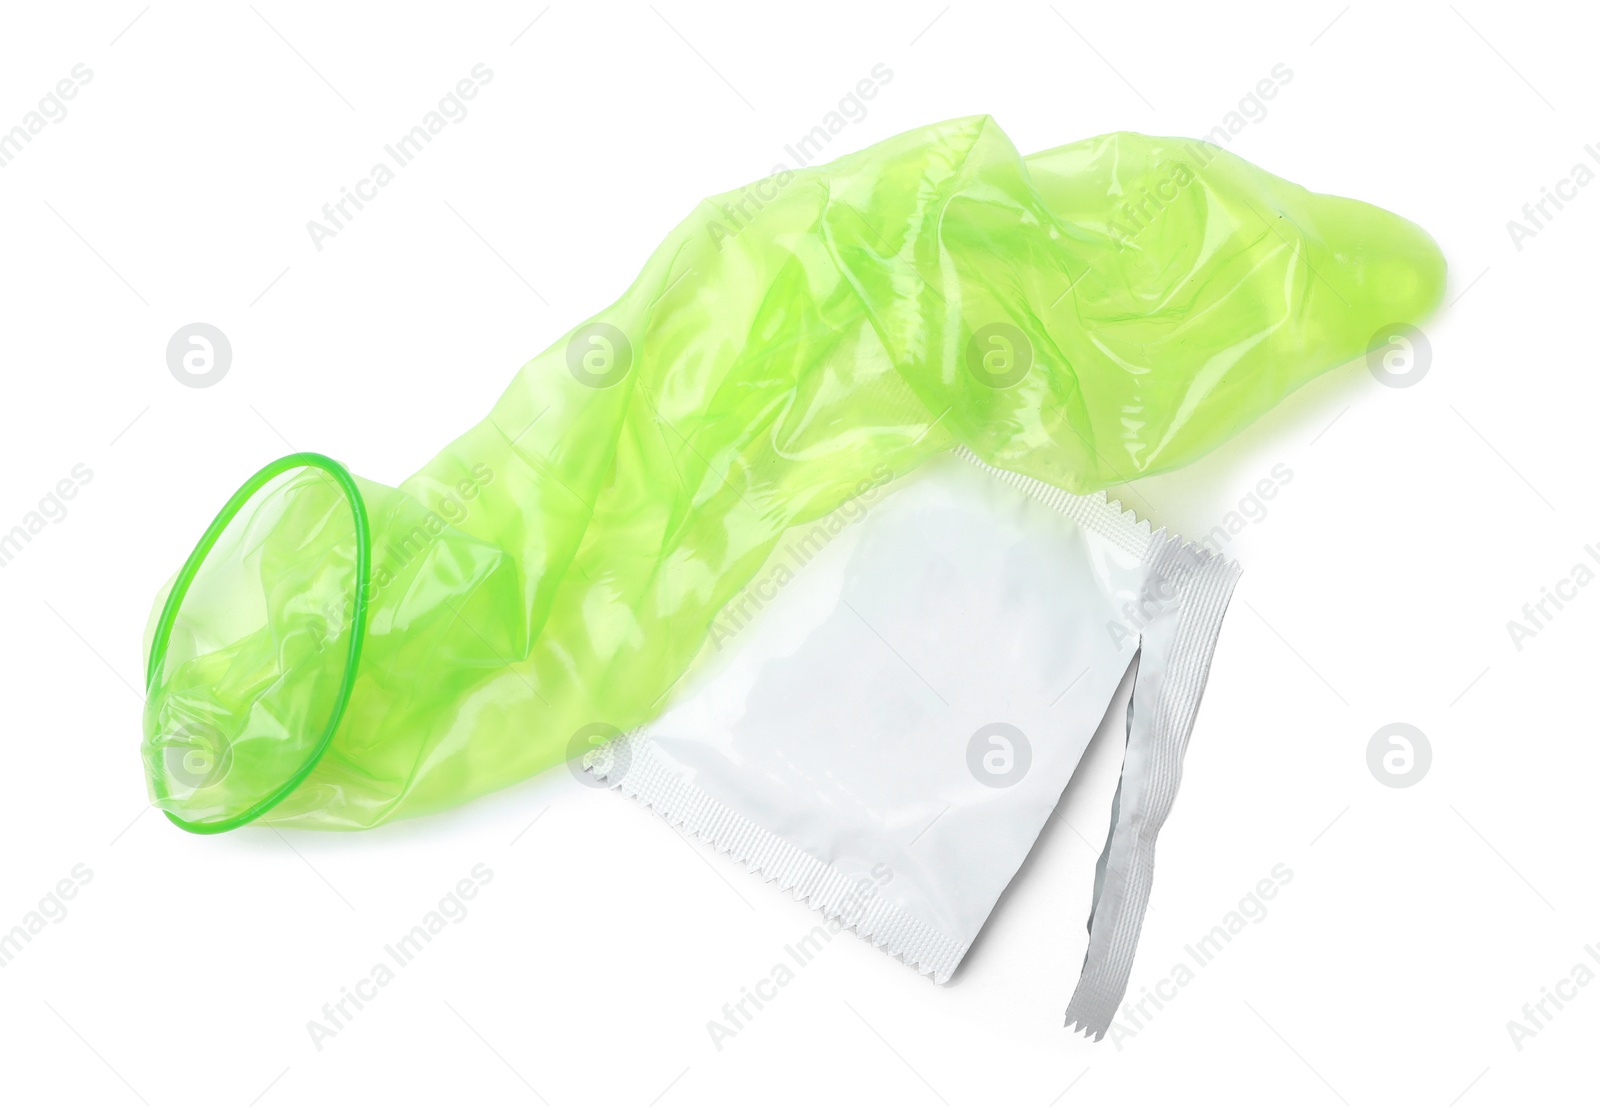 Image of Unrolled green condom and package on white background, top view. Safe sex